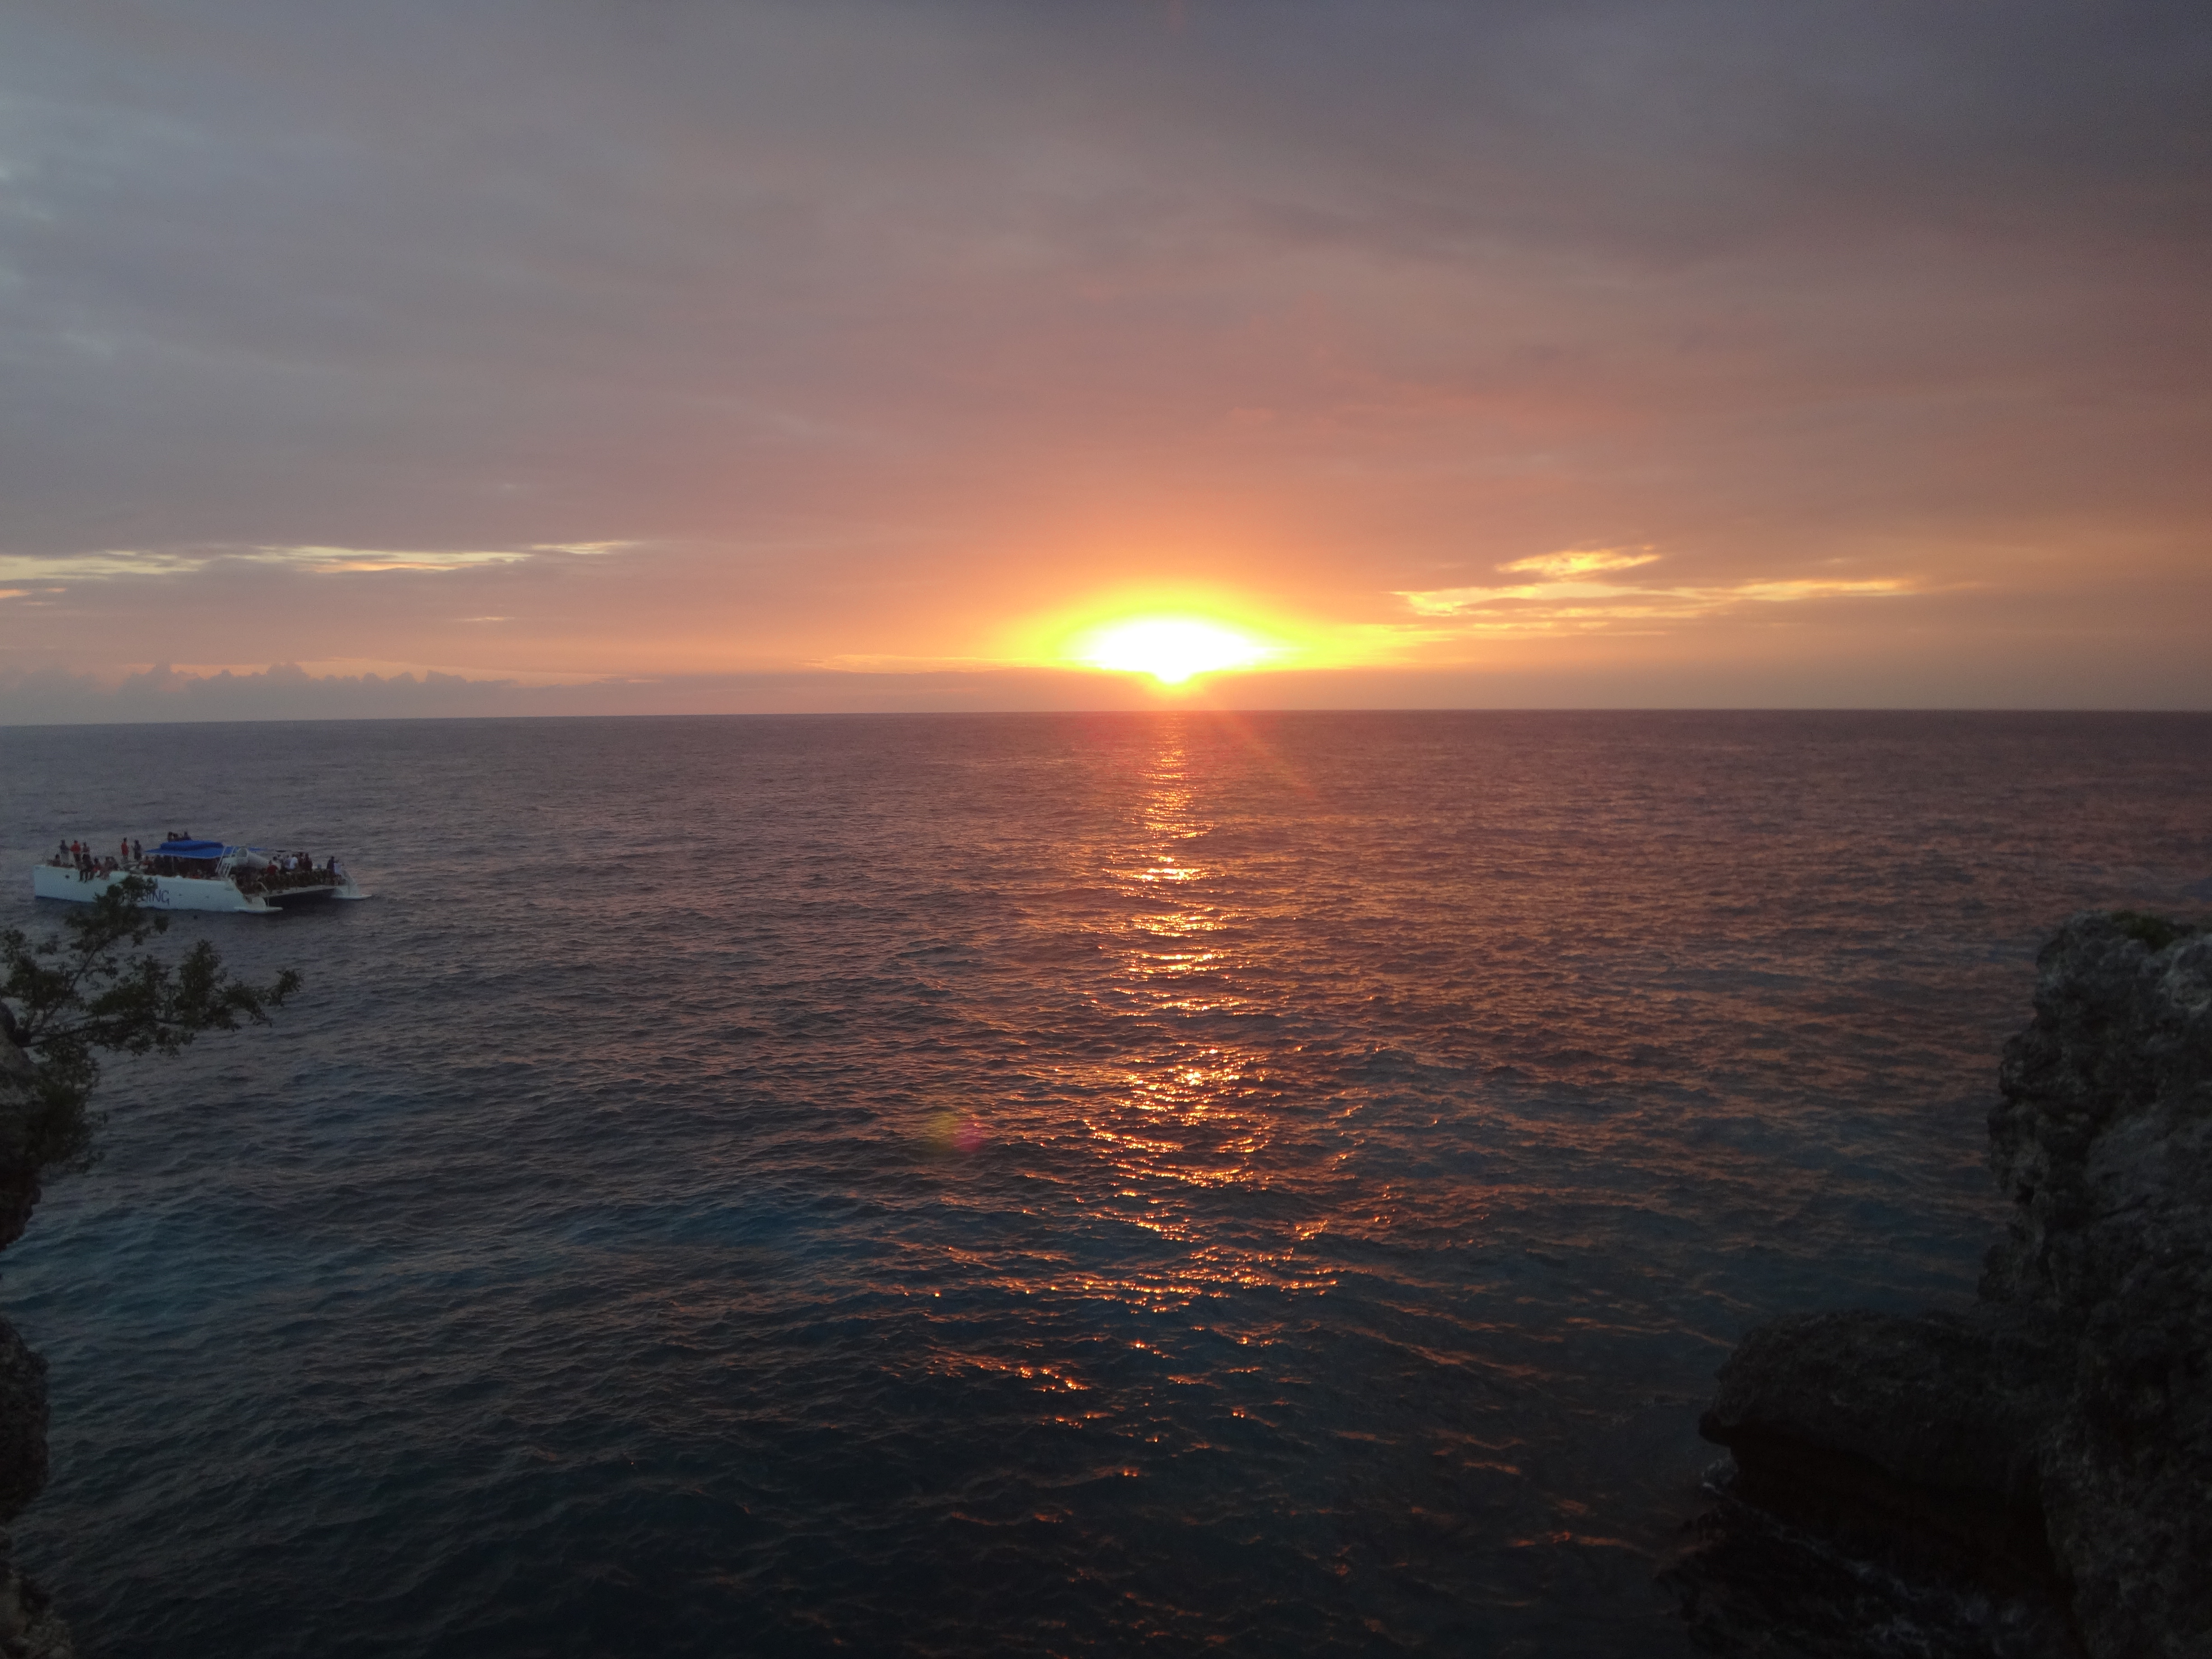 Watching the sunset is a great way to spend an evening at RIck's Cafe in Negril, Jamaica